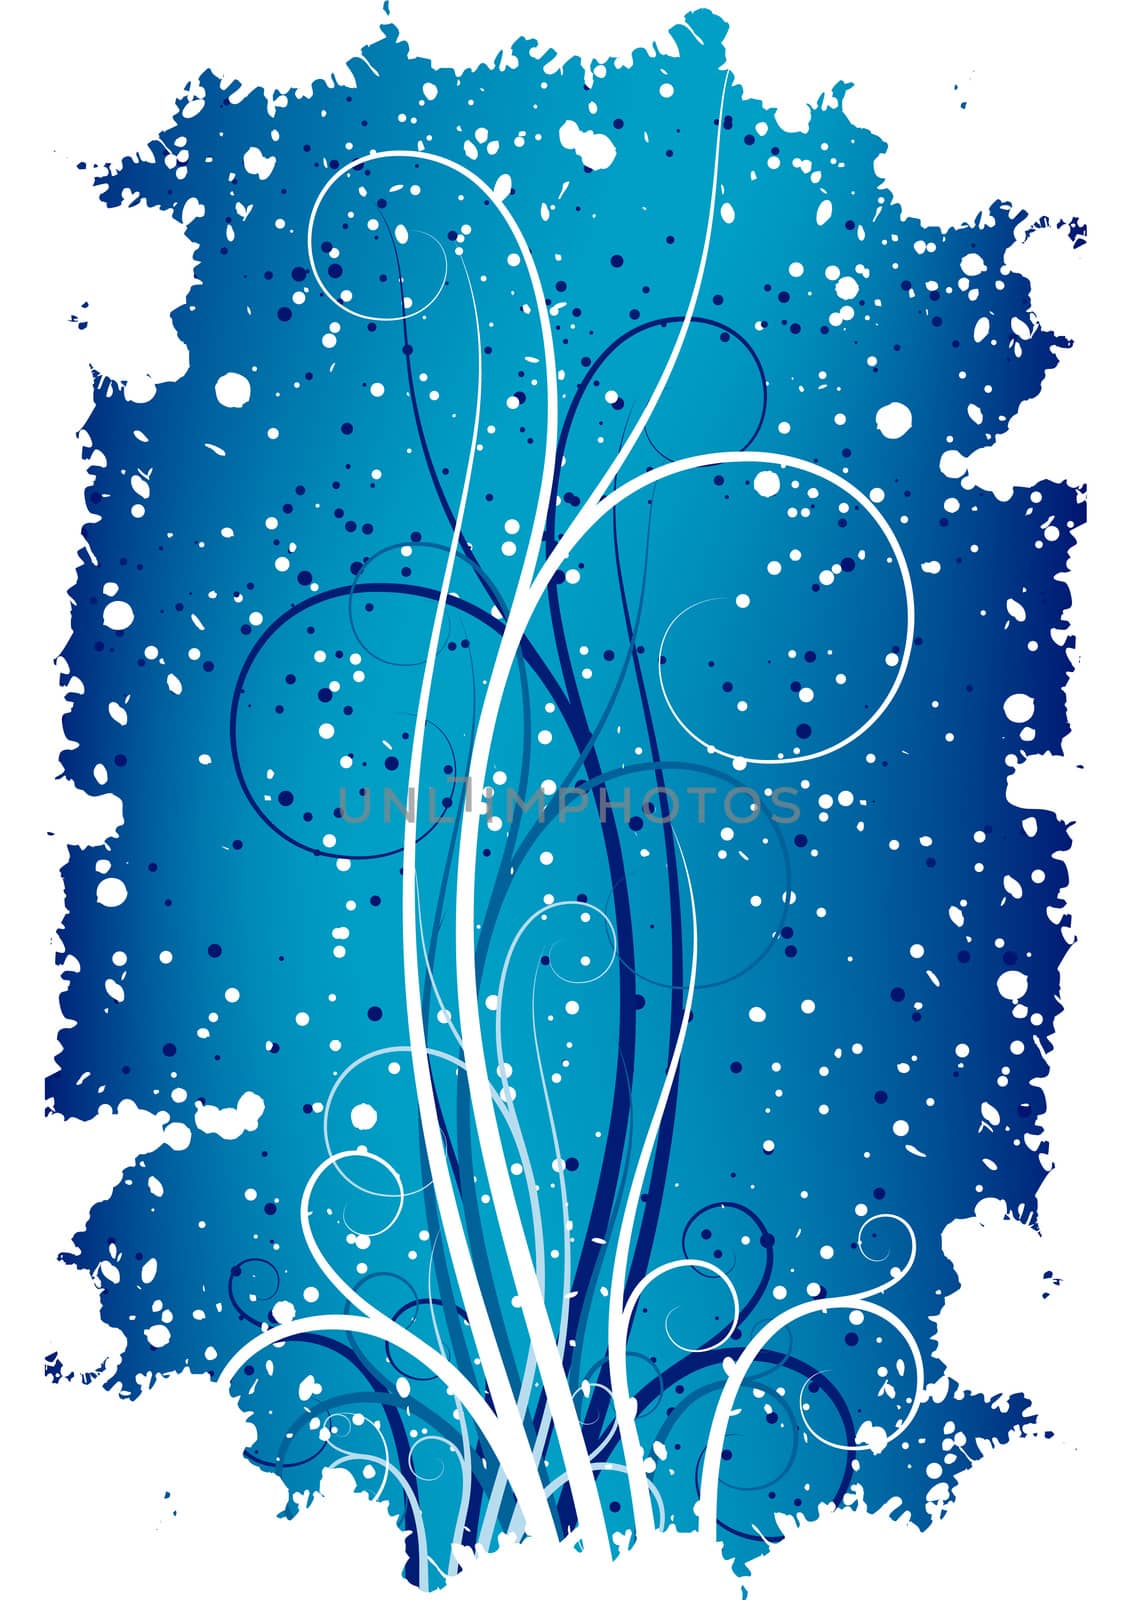 Abstract winter grunge background with flakes and scrolls by WaD